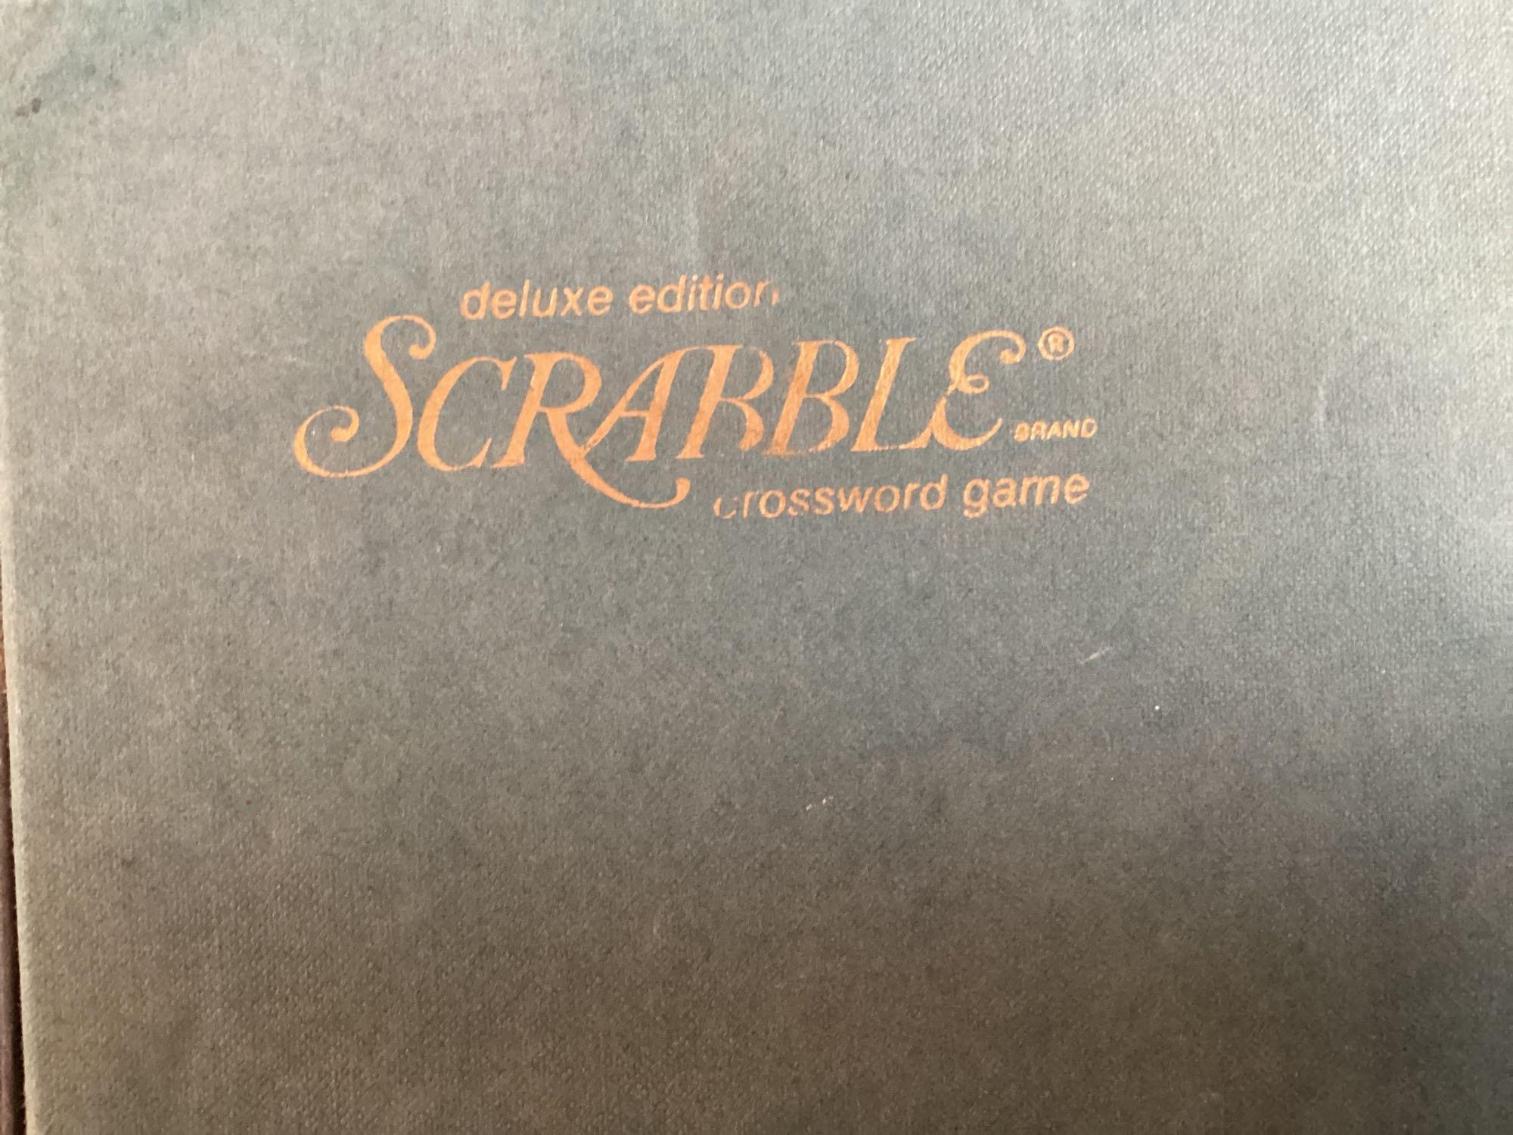 Image for Scrabble Deluxe Edition